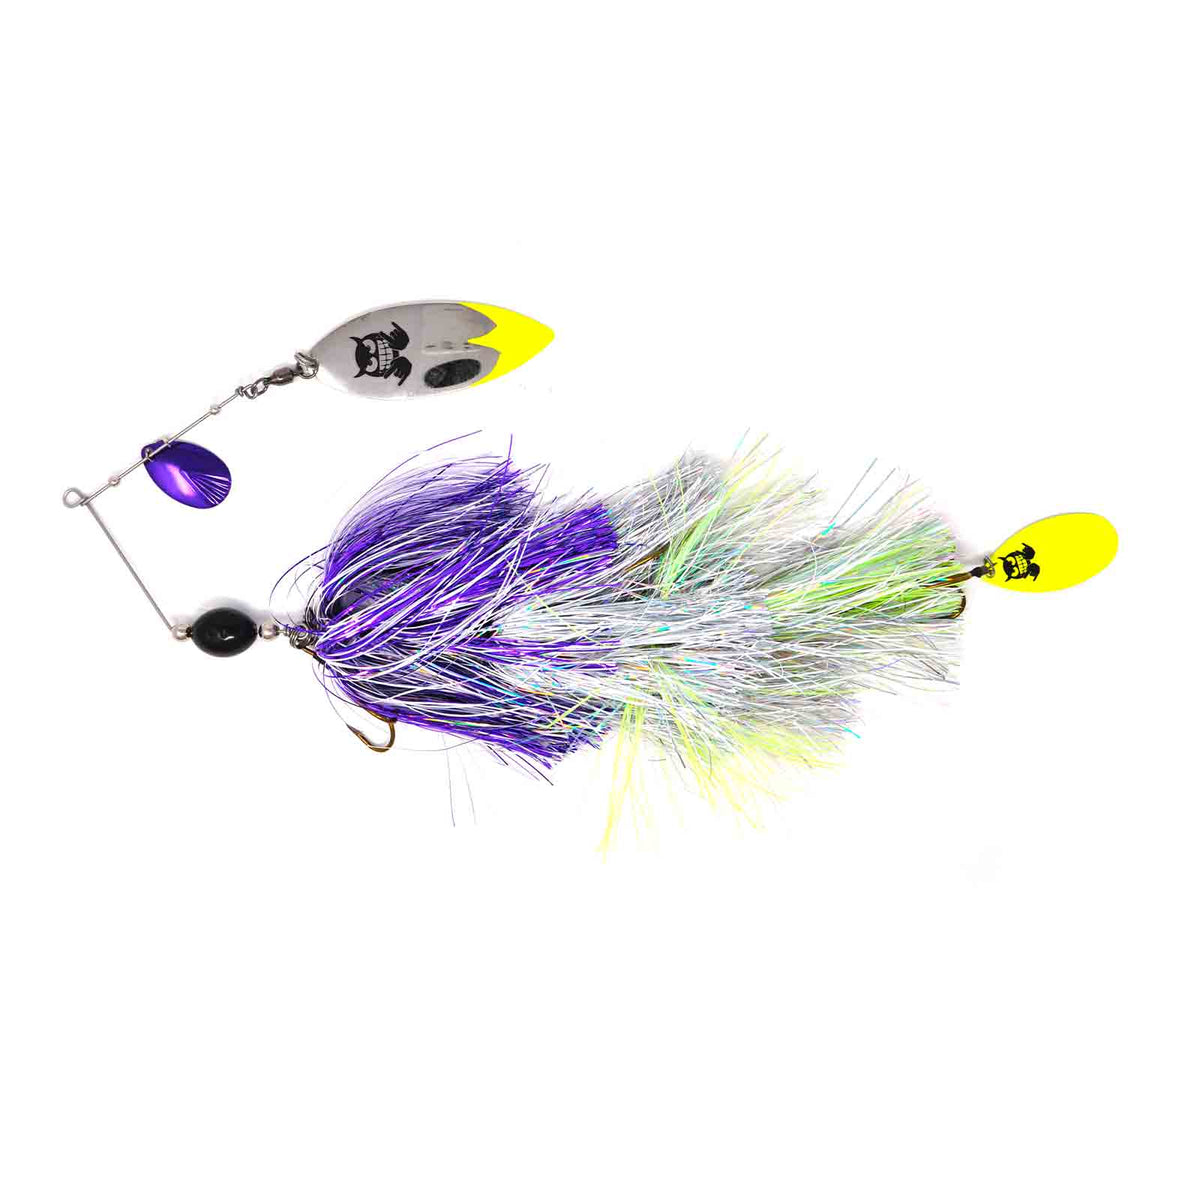 View of Bucktails Mad Chasse Monster Troller - Mad School Sexy shad available at EZOKO Pike and Musky Shop